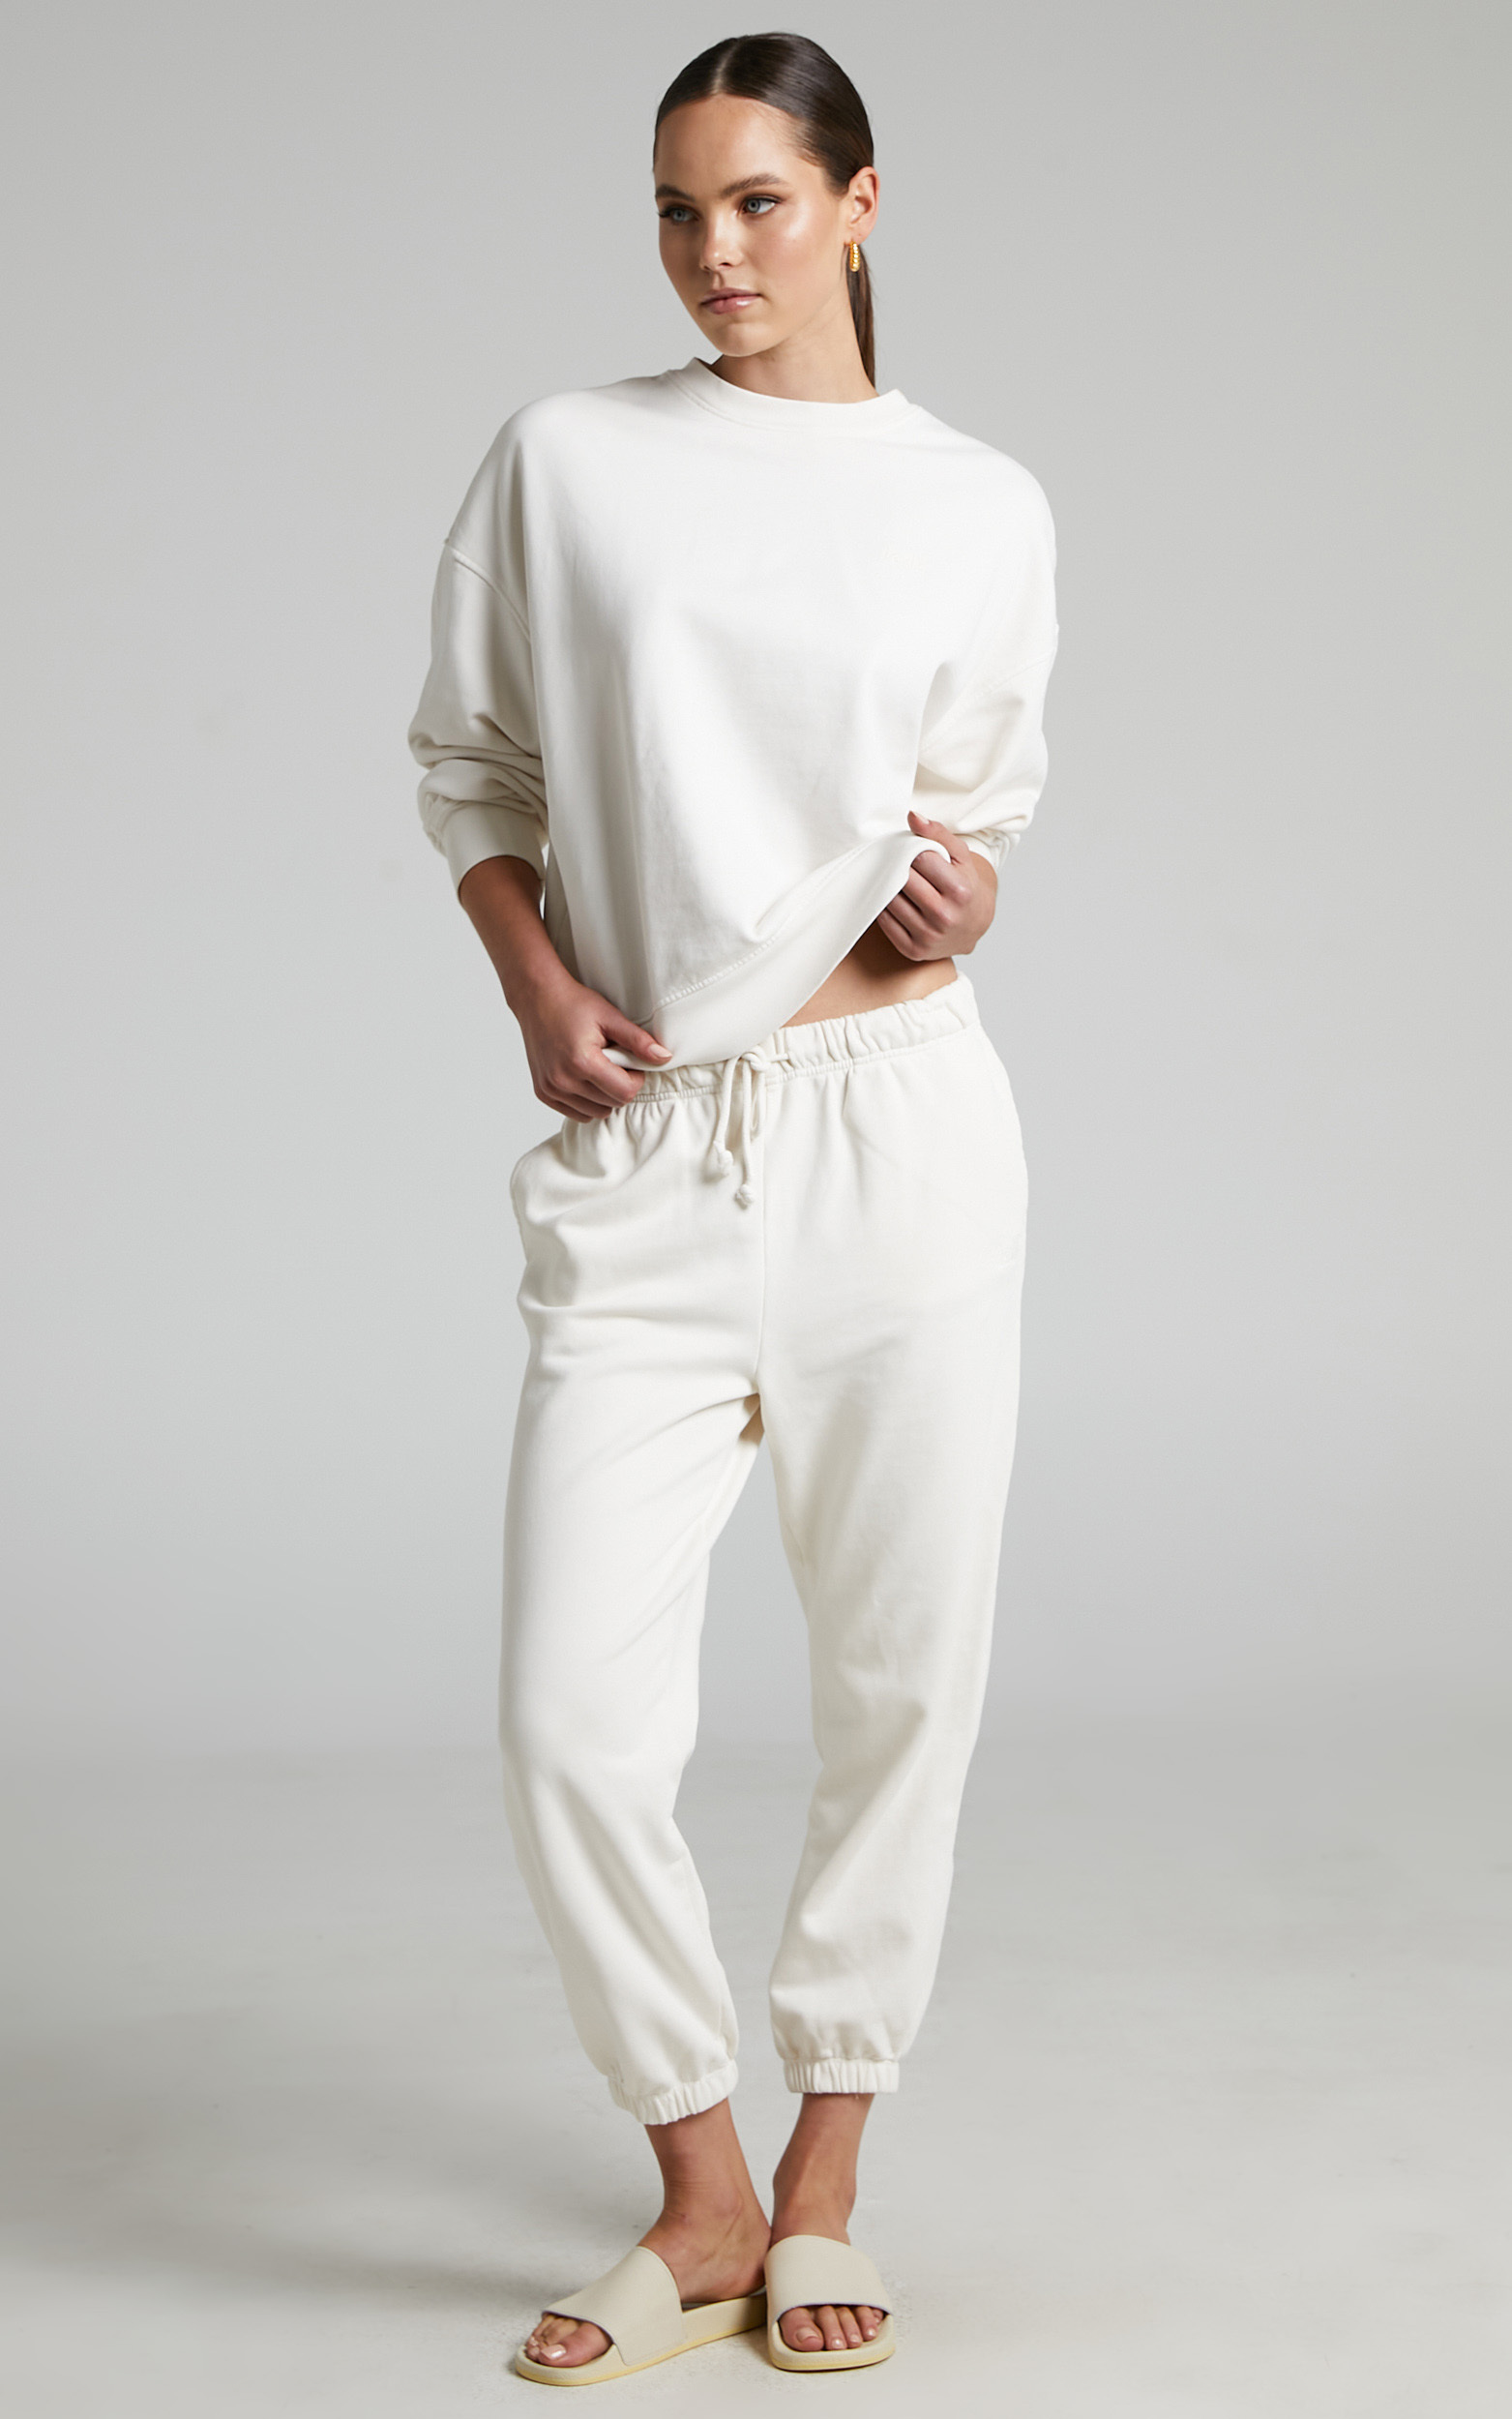 Levi's - WFH Trackpants in Sugar Swizzle - L, CRE1, hi-res image number null